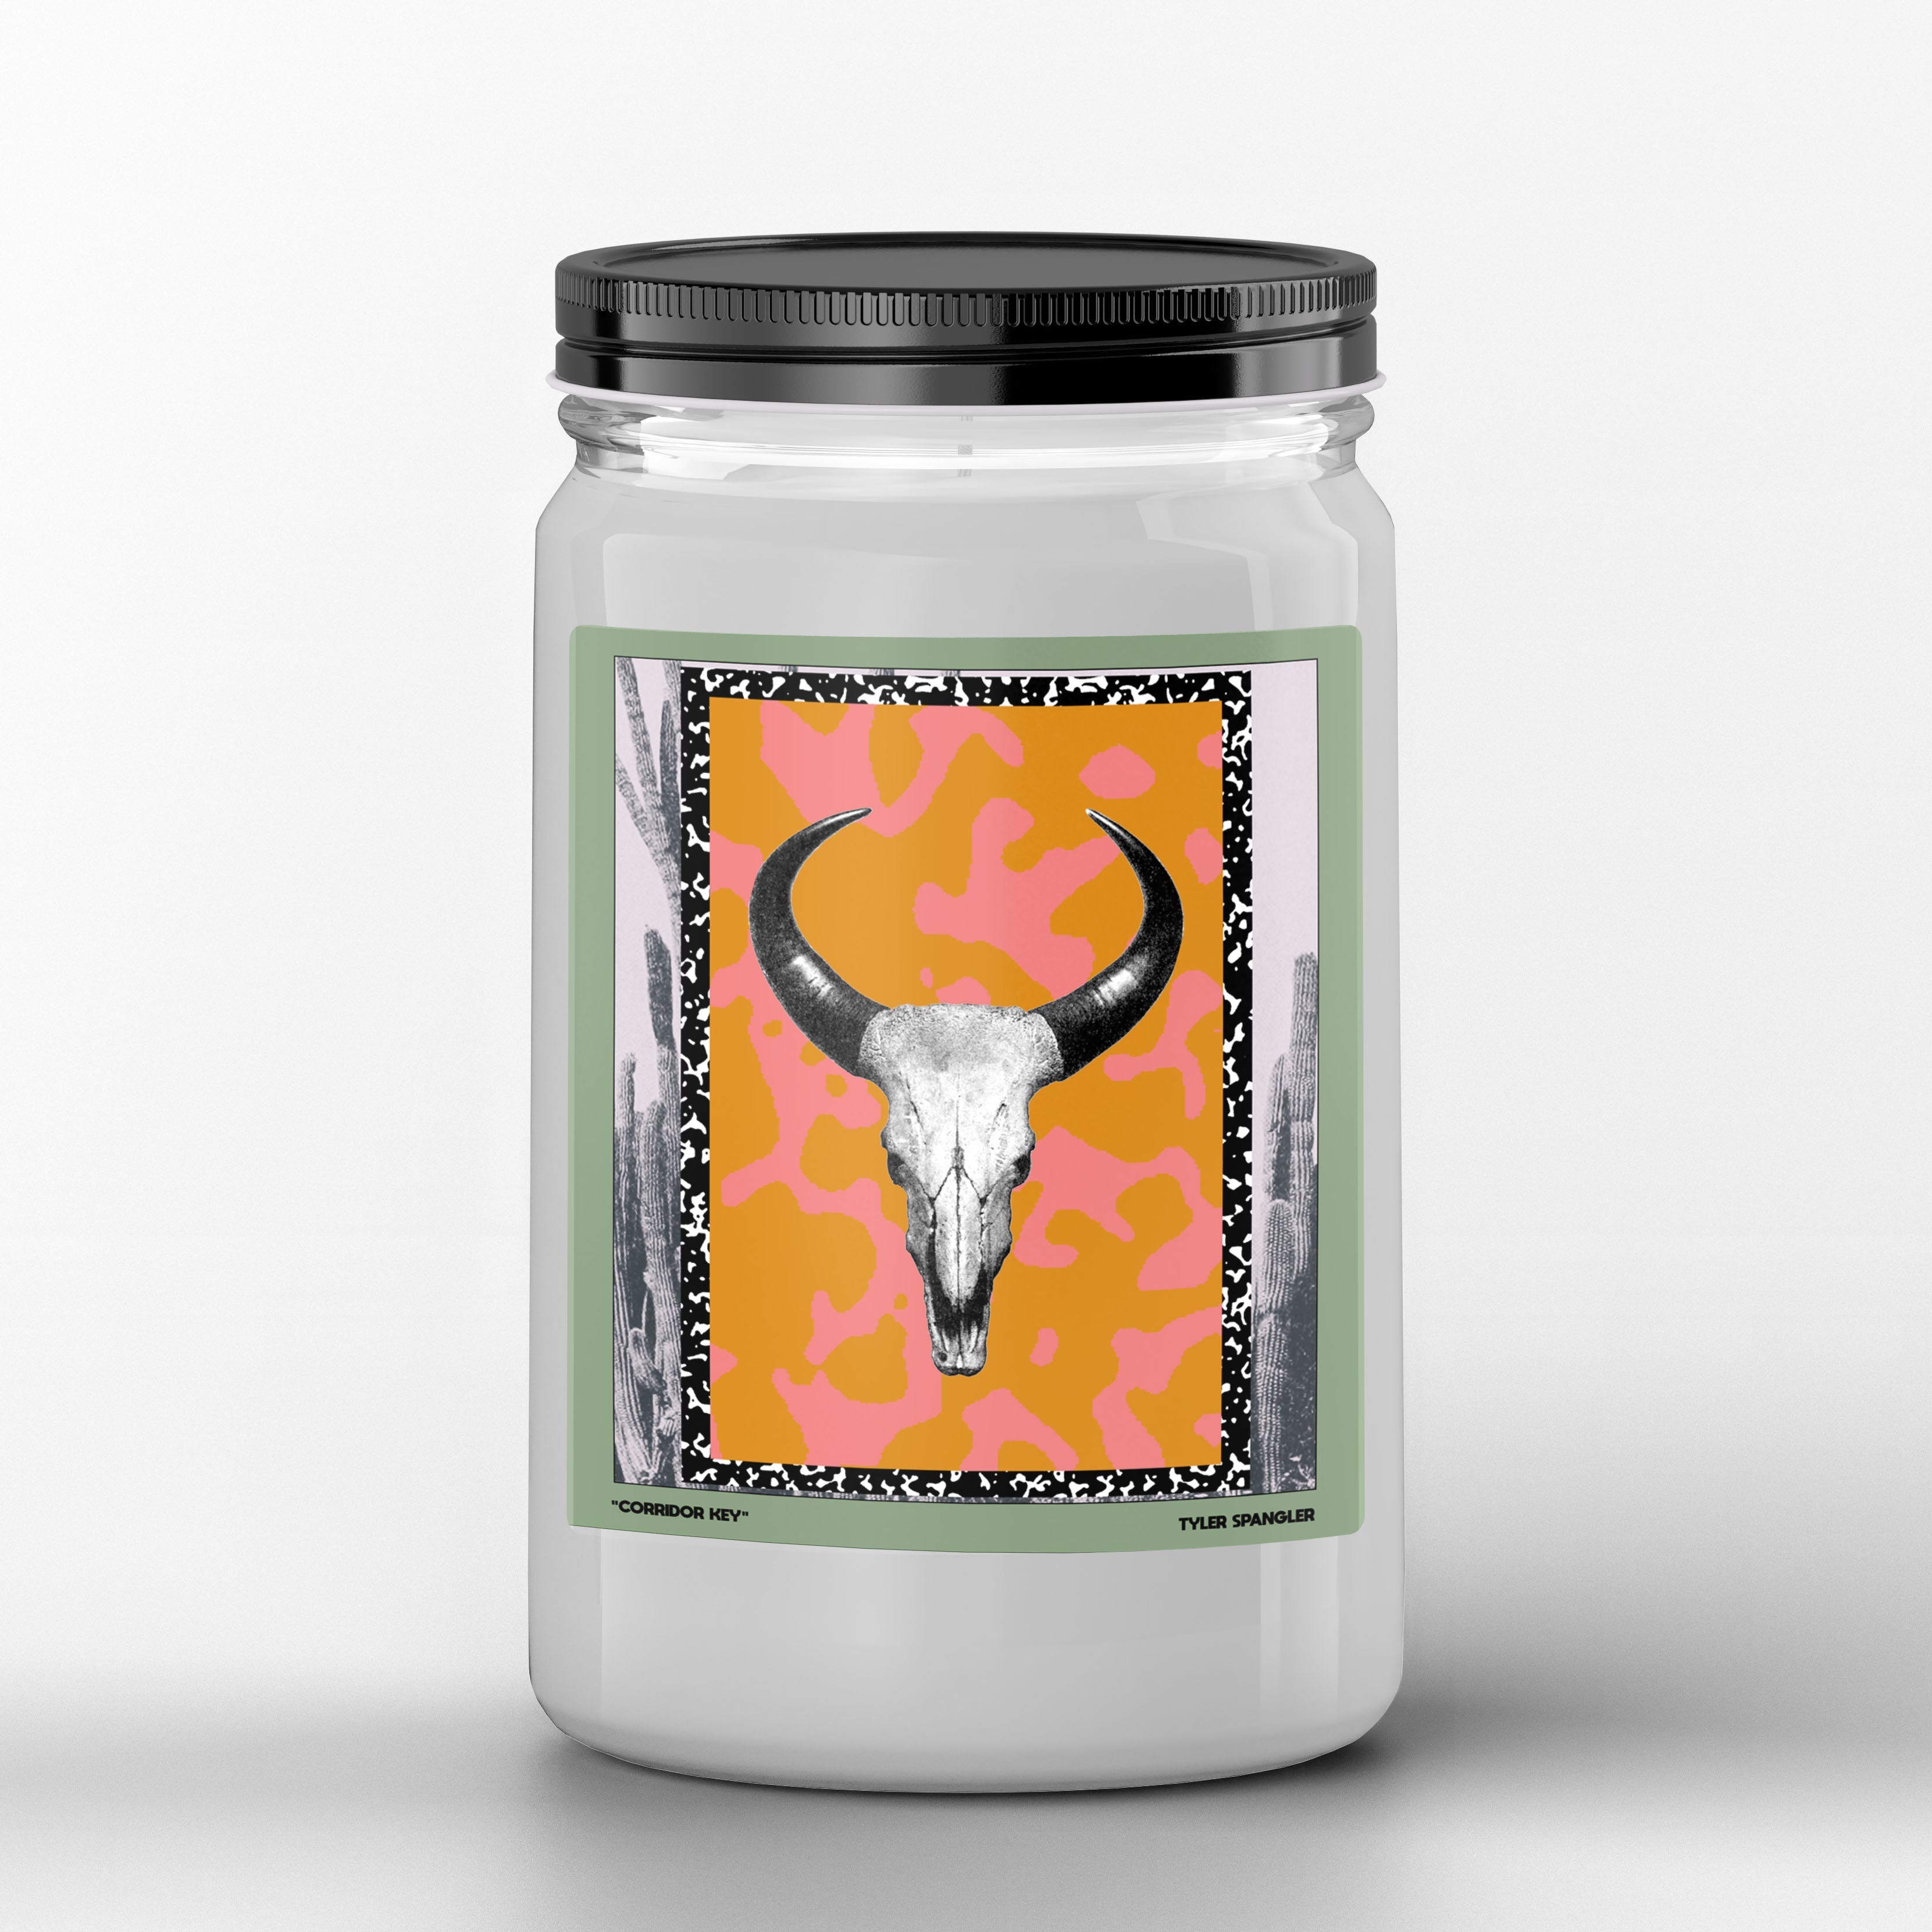 Tyler Spangler Scented Candle I Animal Skull I Premium Scented Candle